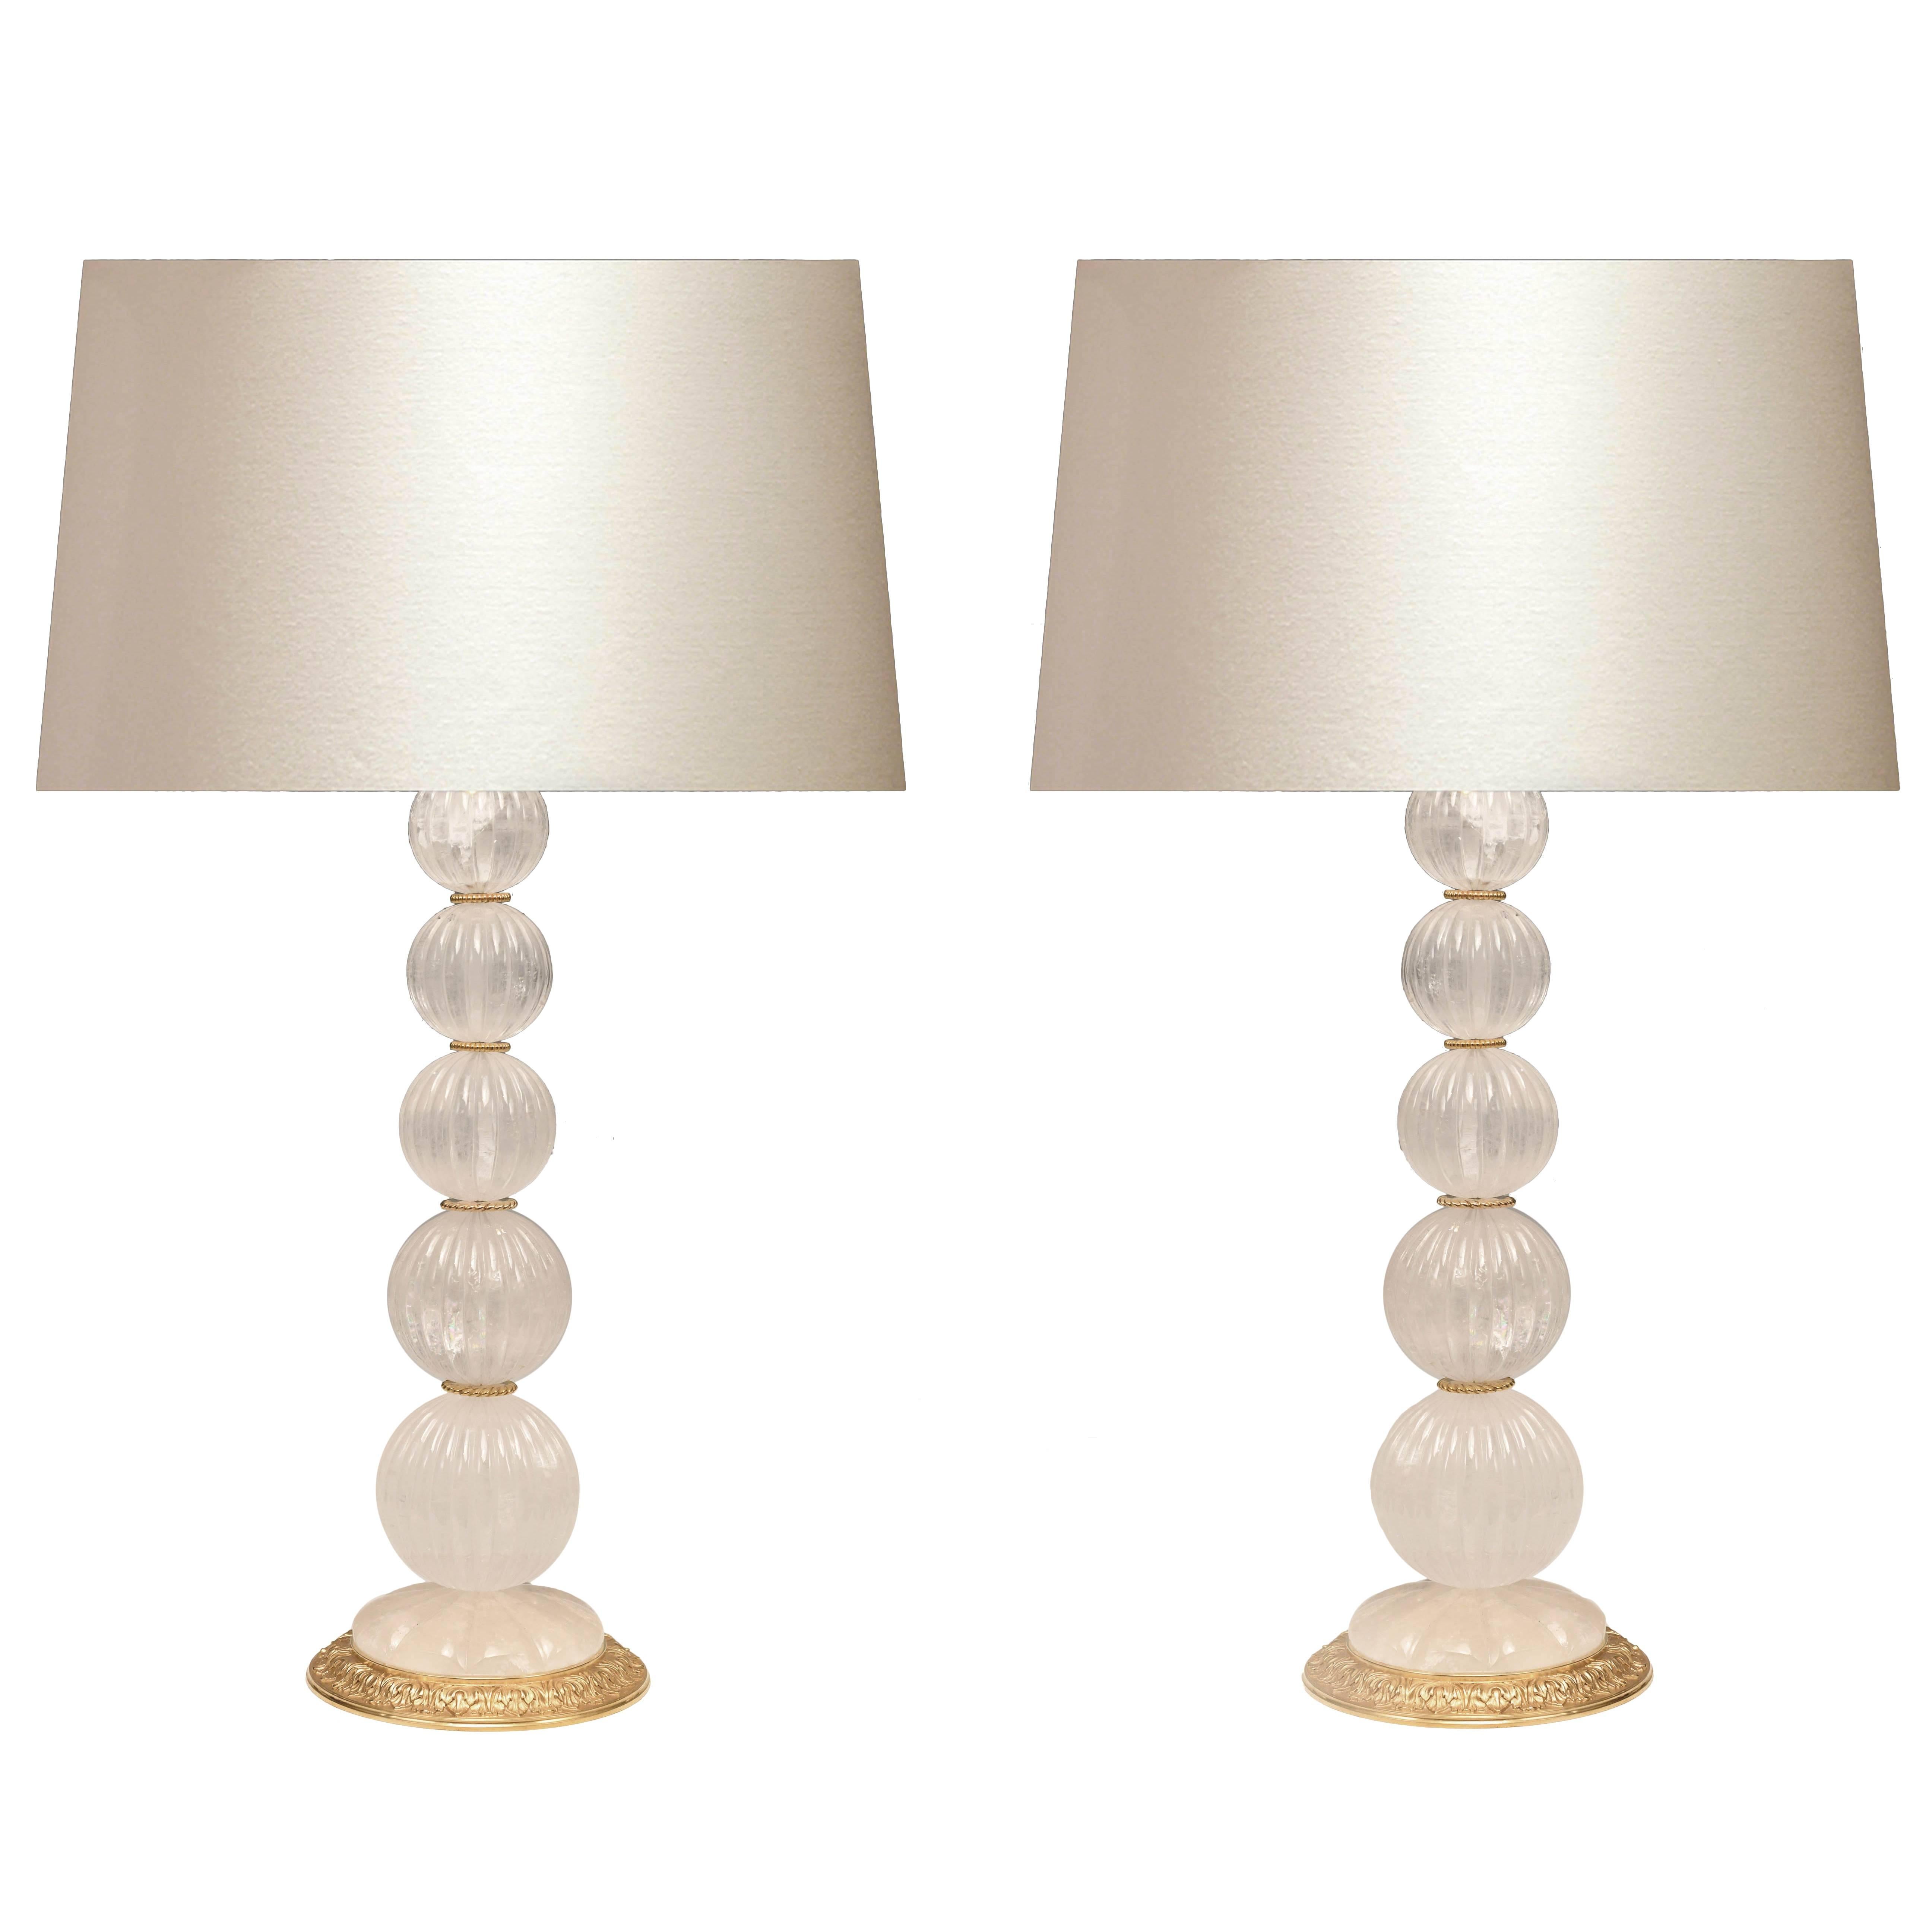 Pair of Modern Rock Crystal Quartz Lamps For Sale at 1stDibs